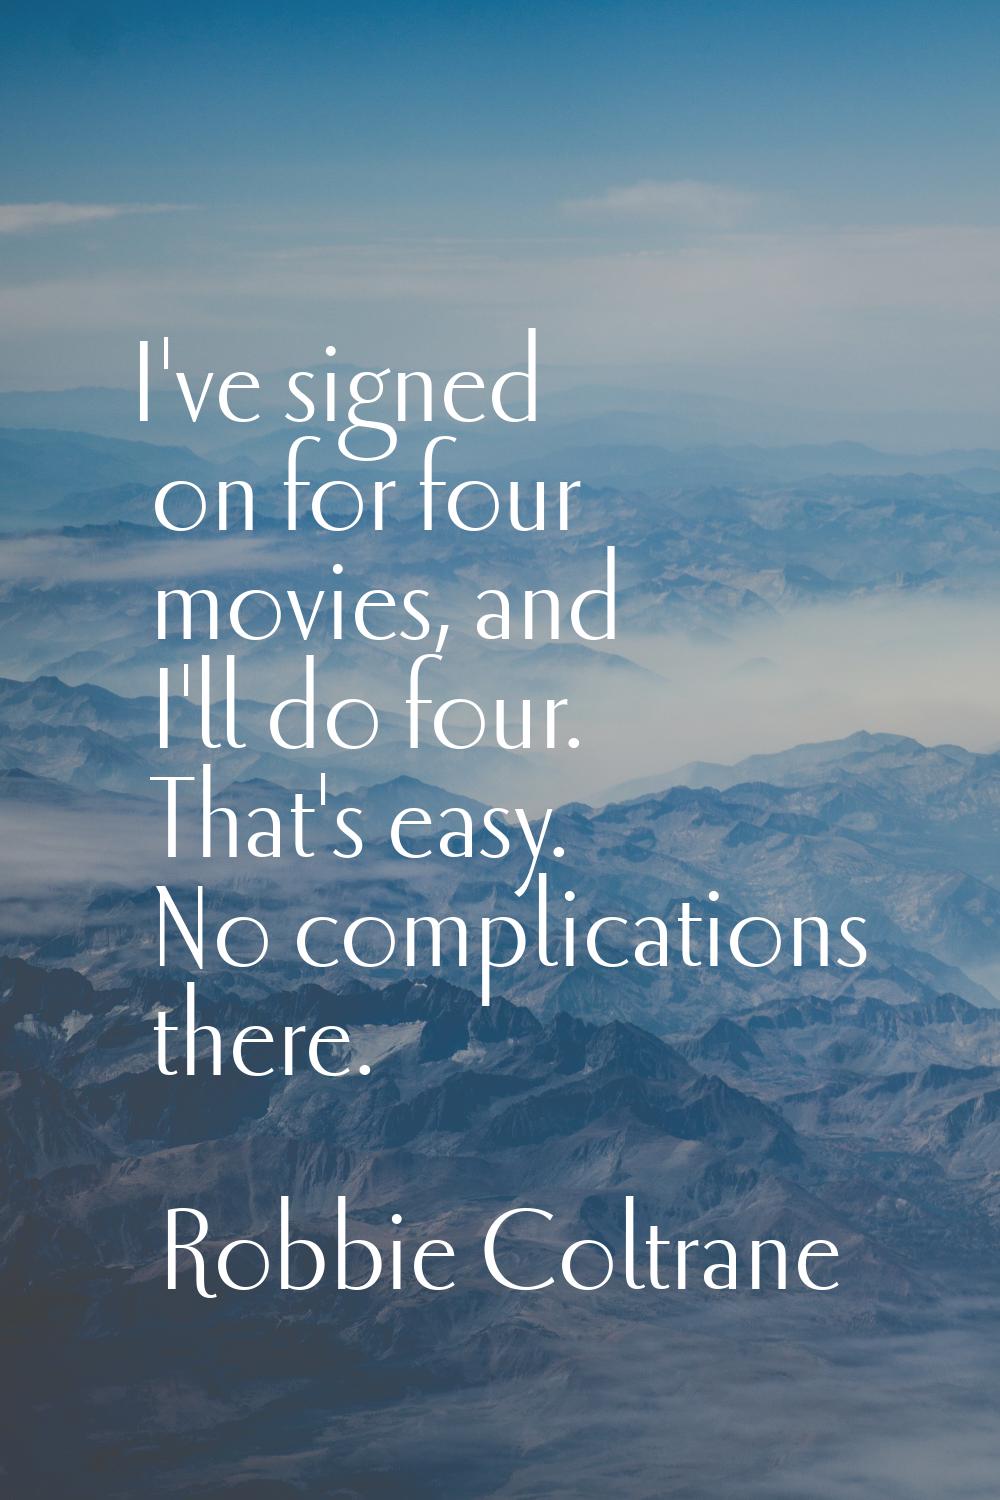 I've signed on for four movies, and I'll do four. That's easy. No complications there.